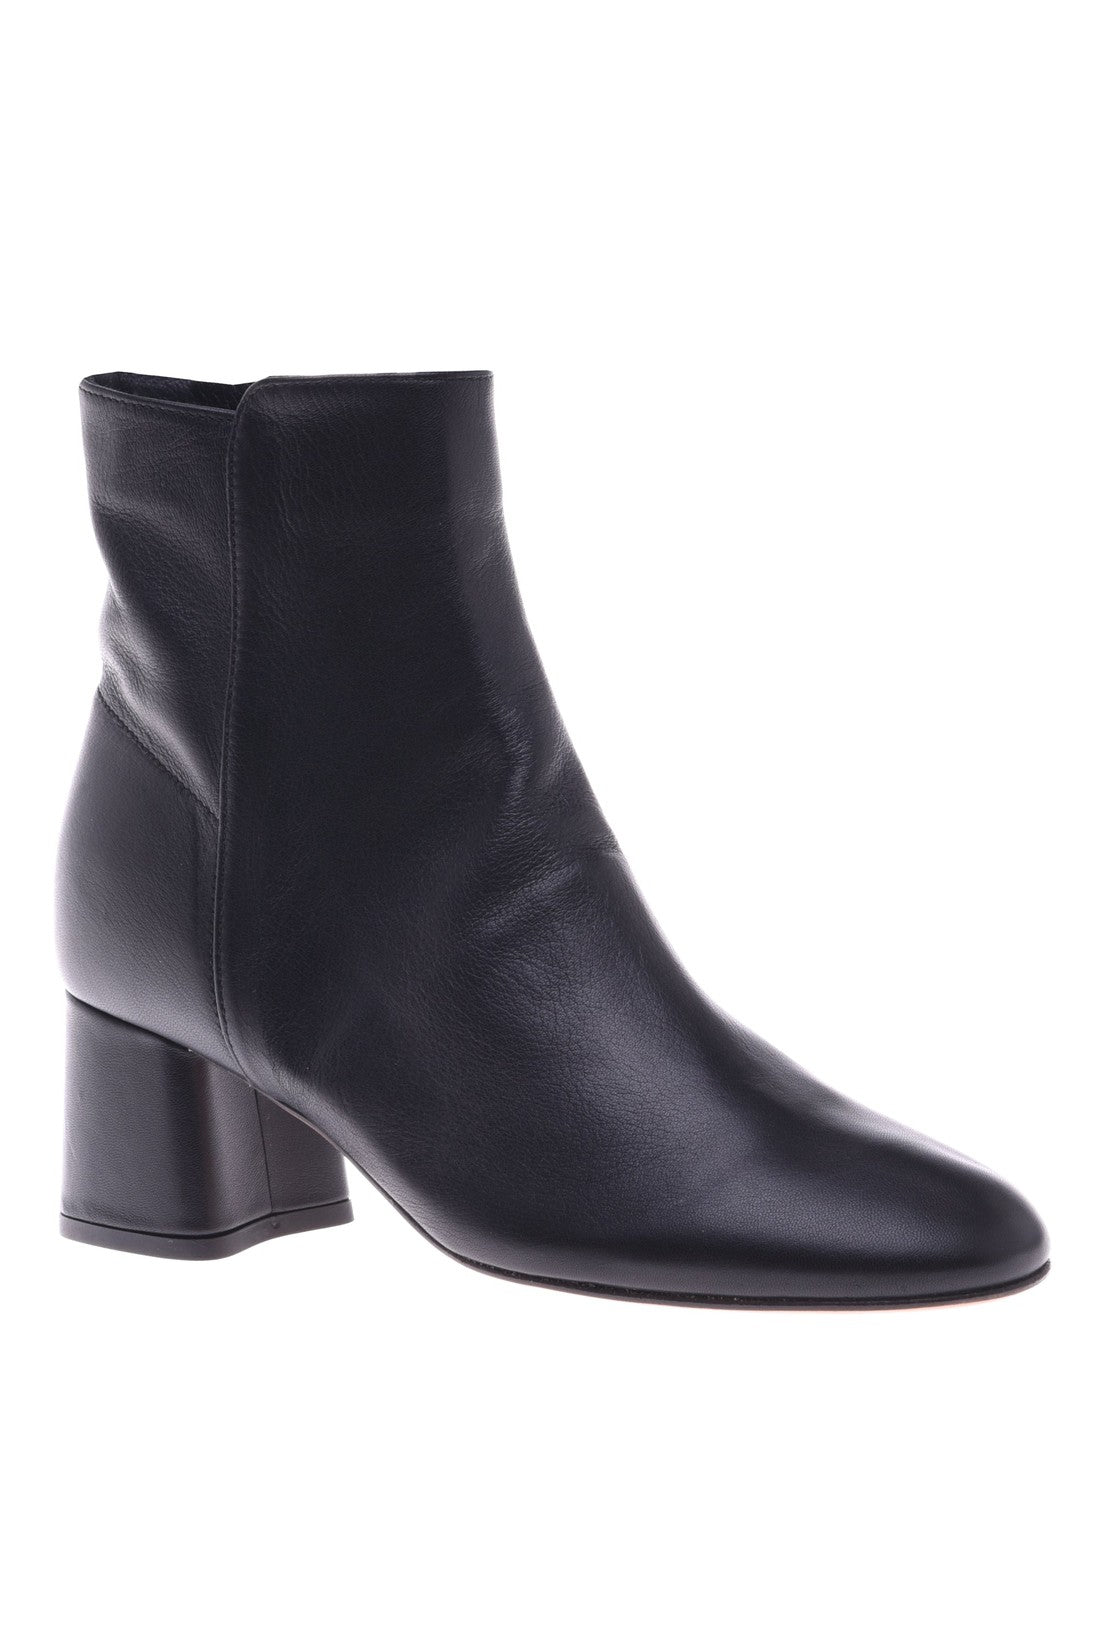 BALDININI-OUTLET-SALE-Ankle-boot-in-black-nappa-leather-Stiefel-Stiefeletten-35-ARCHIVE-COLLECTION_89c491c6-d714-4ca3-ad30-f7aadacae73c.jpg